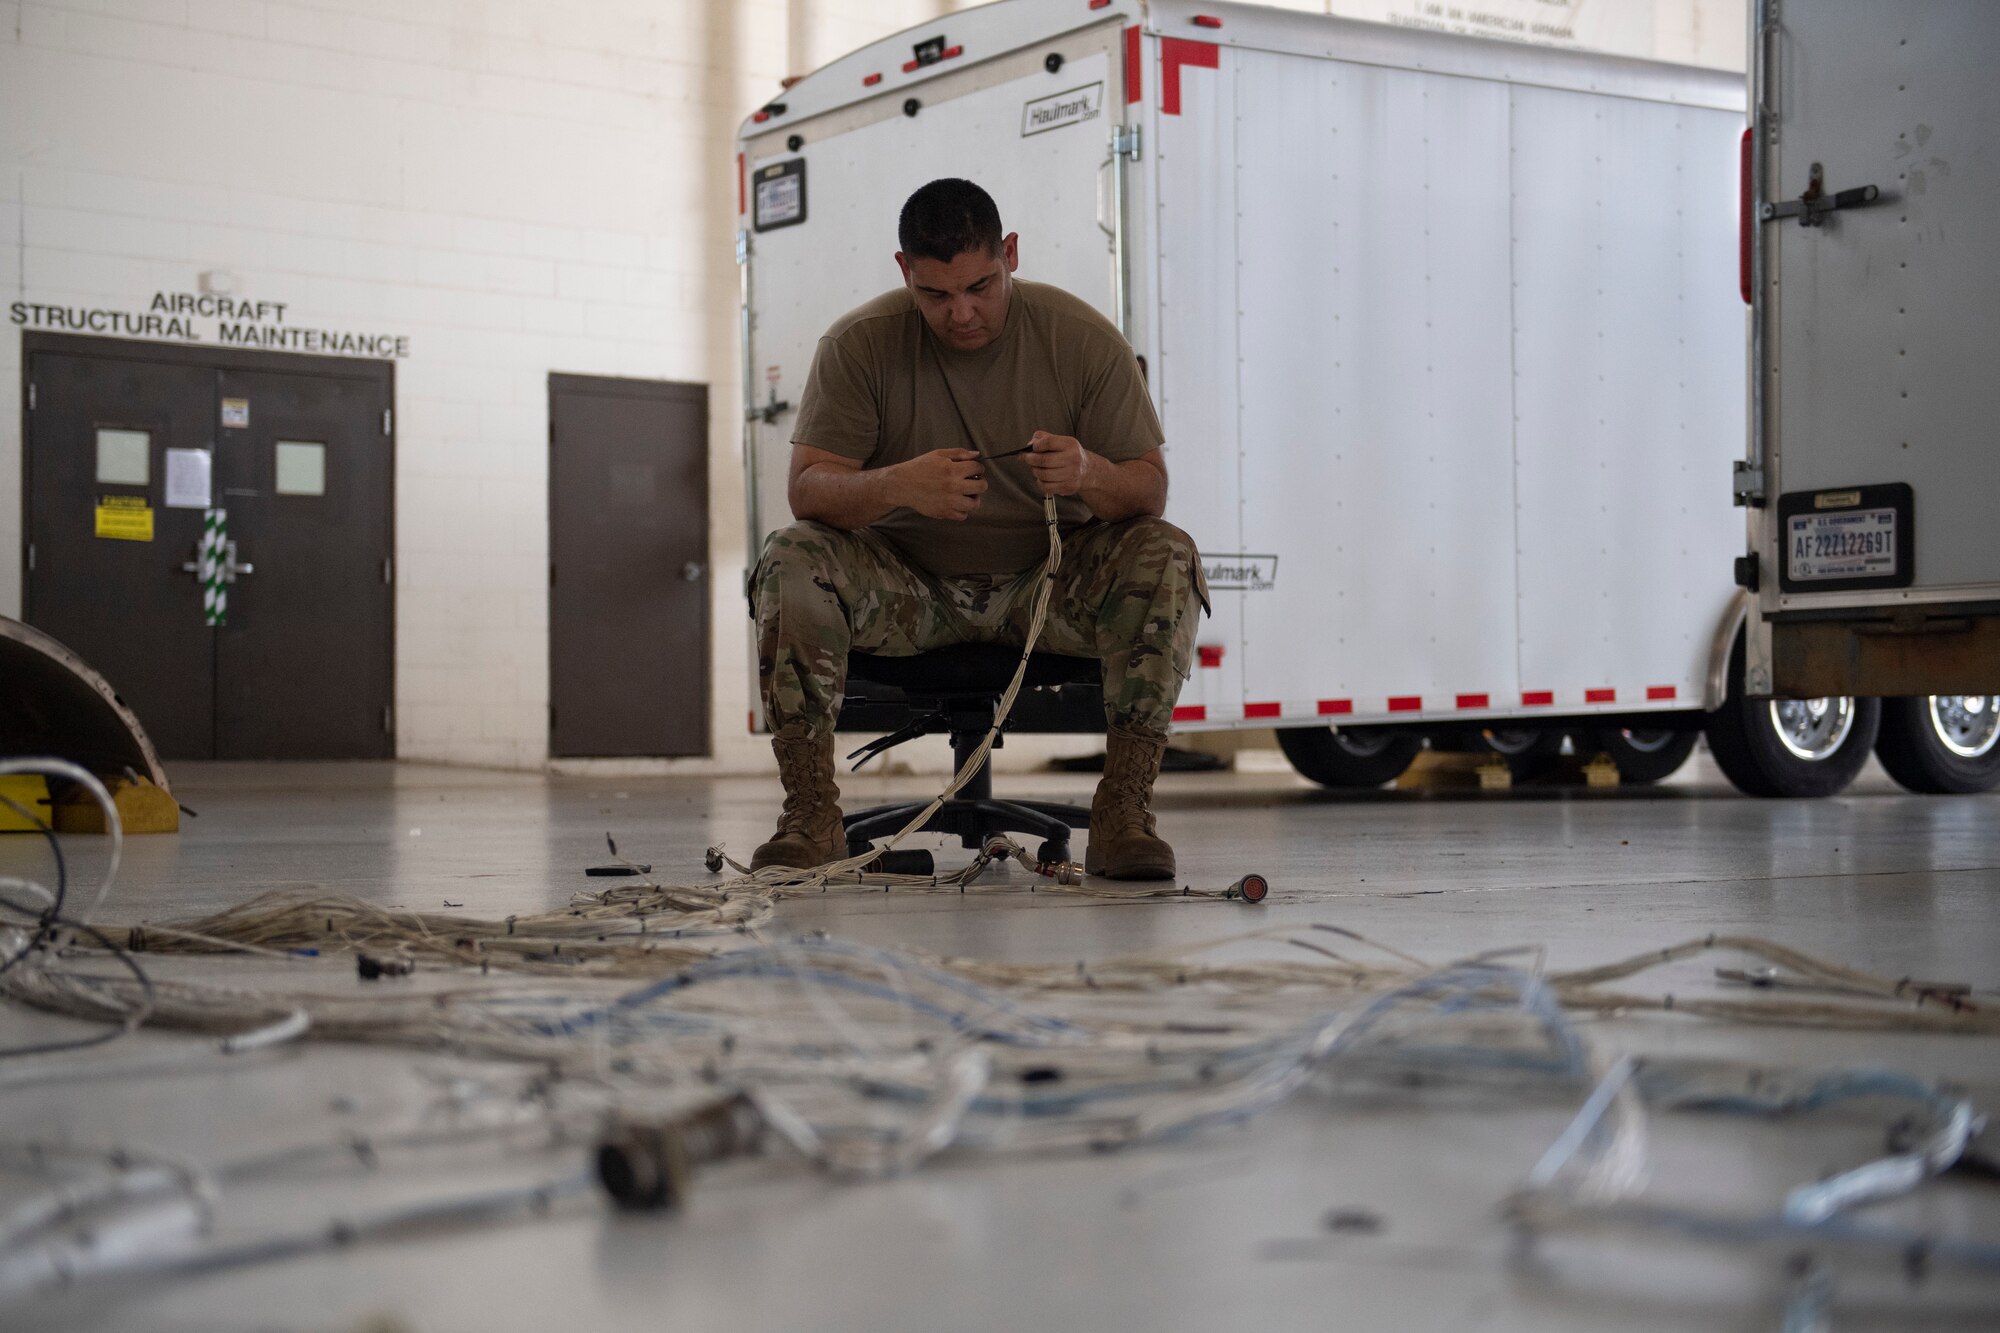 U.S. Air Force Tech. Sgt. Abelino Ledesma, 309th Aircraft Maintenance Group electrical and environmental craftsman, reconfigures electrical wires from an A-10C Thunderbolt II at Moody Air Force Base, Georgia, June 21, 2022. The 309th AMXG arrived from Hill Air Force Base, Utah, to remove and replace the wings on an A-10C. The wires from the old wing were taken out, recycled and configured together to fit into the new wing. (U.S. Air Force photo by Airman 1st Class Rachel Coates)